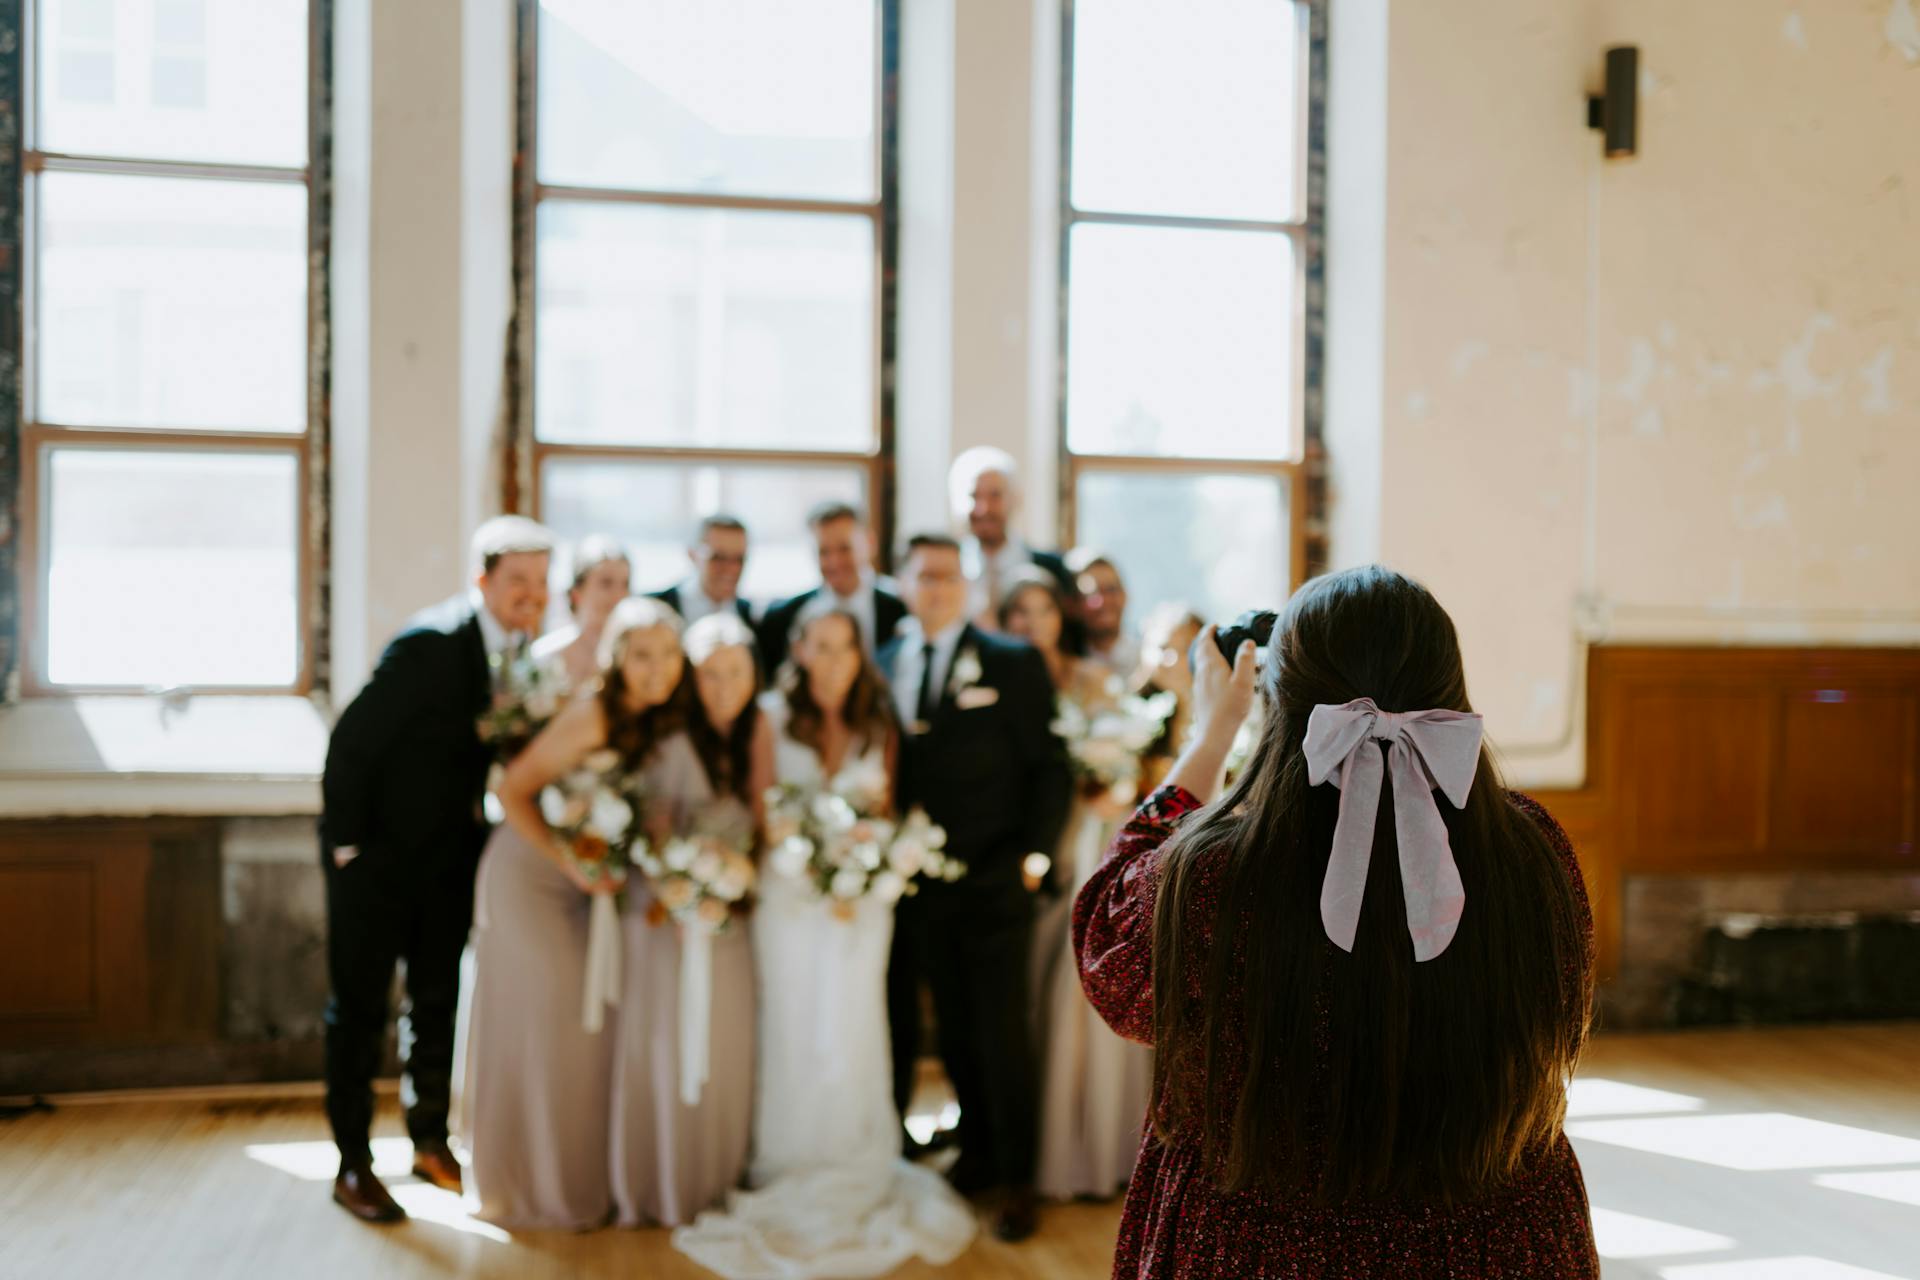 A woman photographing a group at a wedding | Source: Pexels